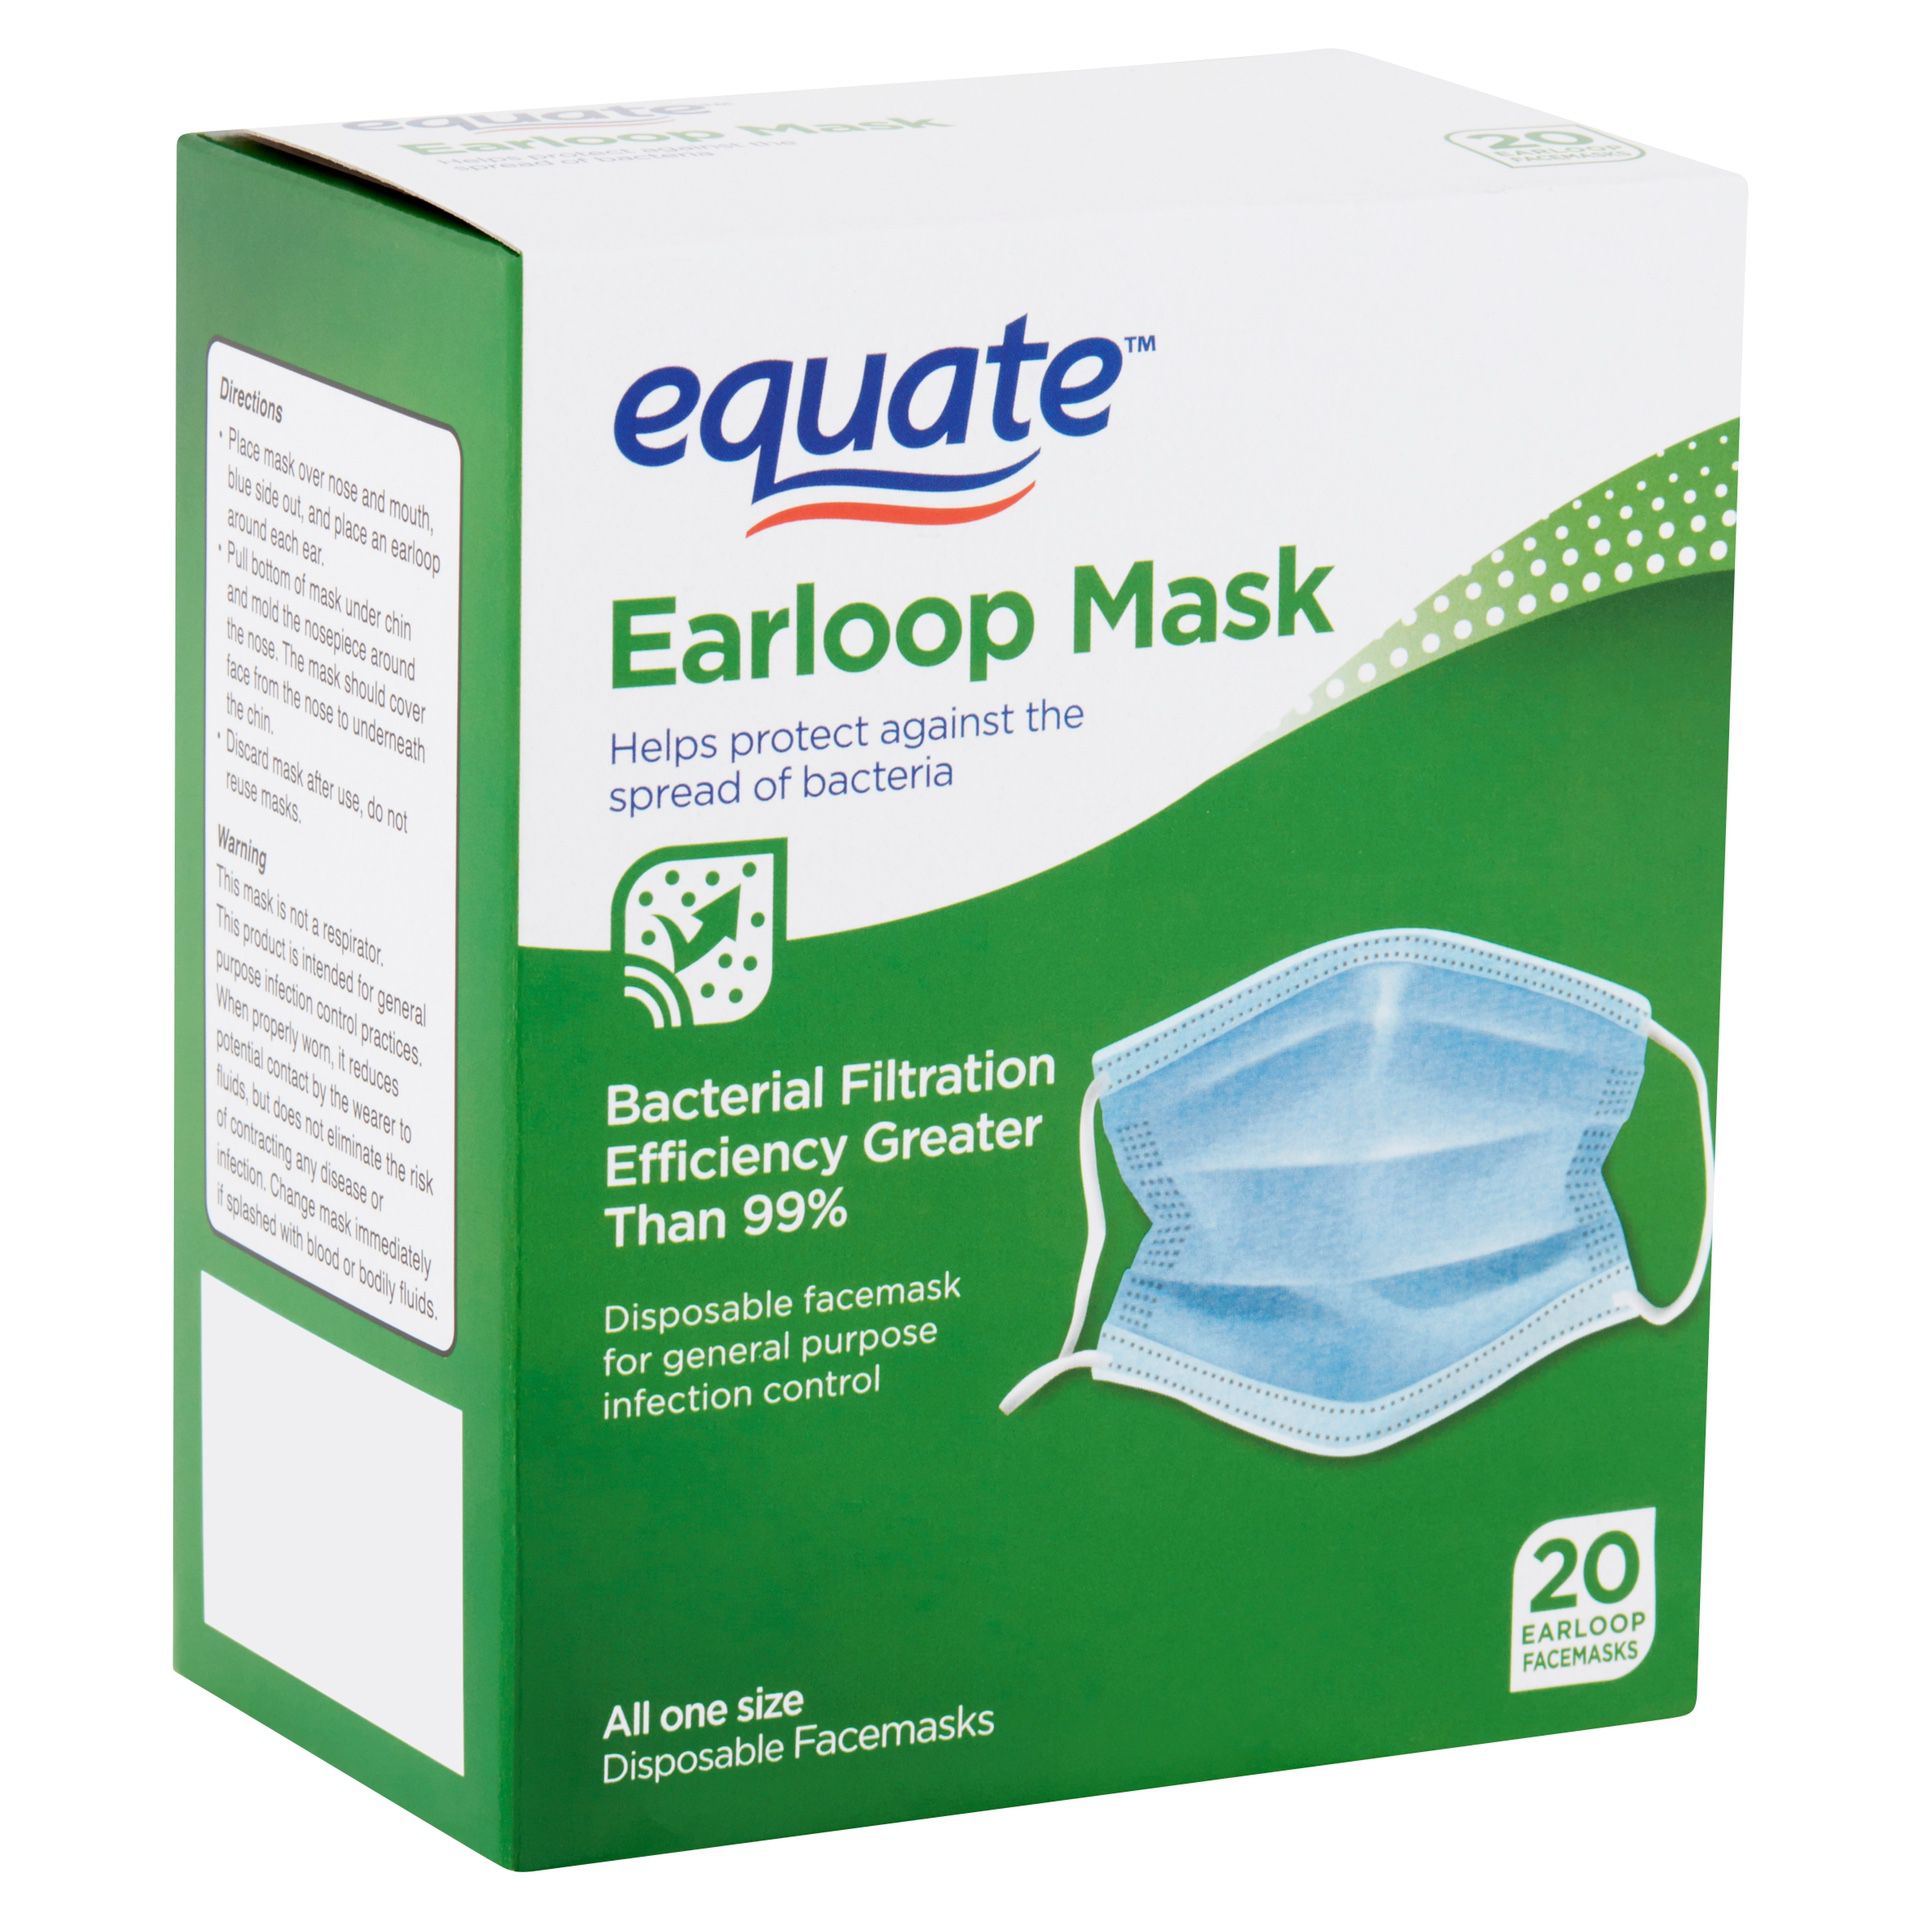 A box of 20 ear loop disposable face masks. Protect yourself from flu, bacteria, dust and pollen